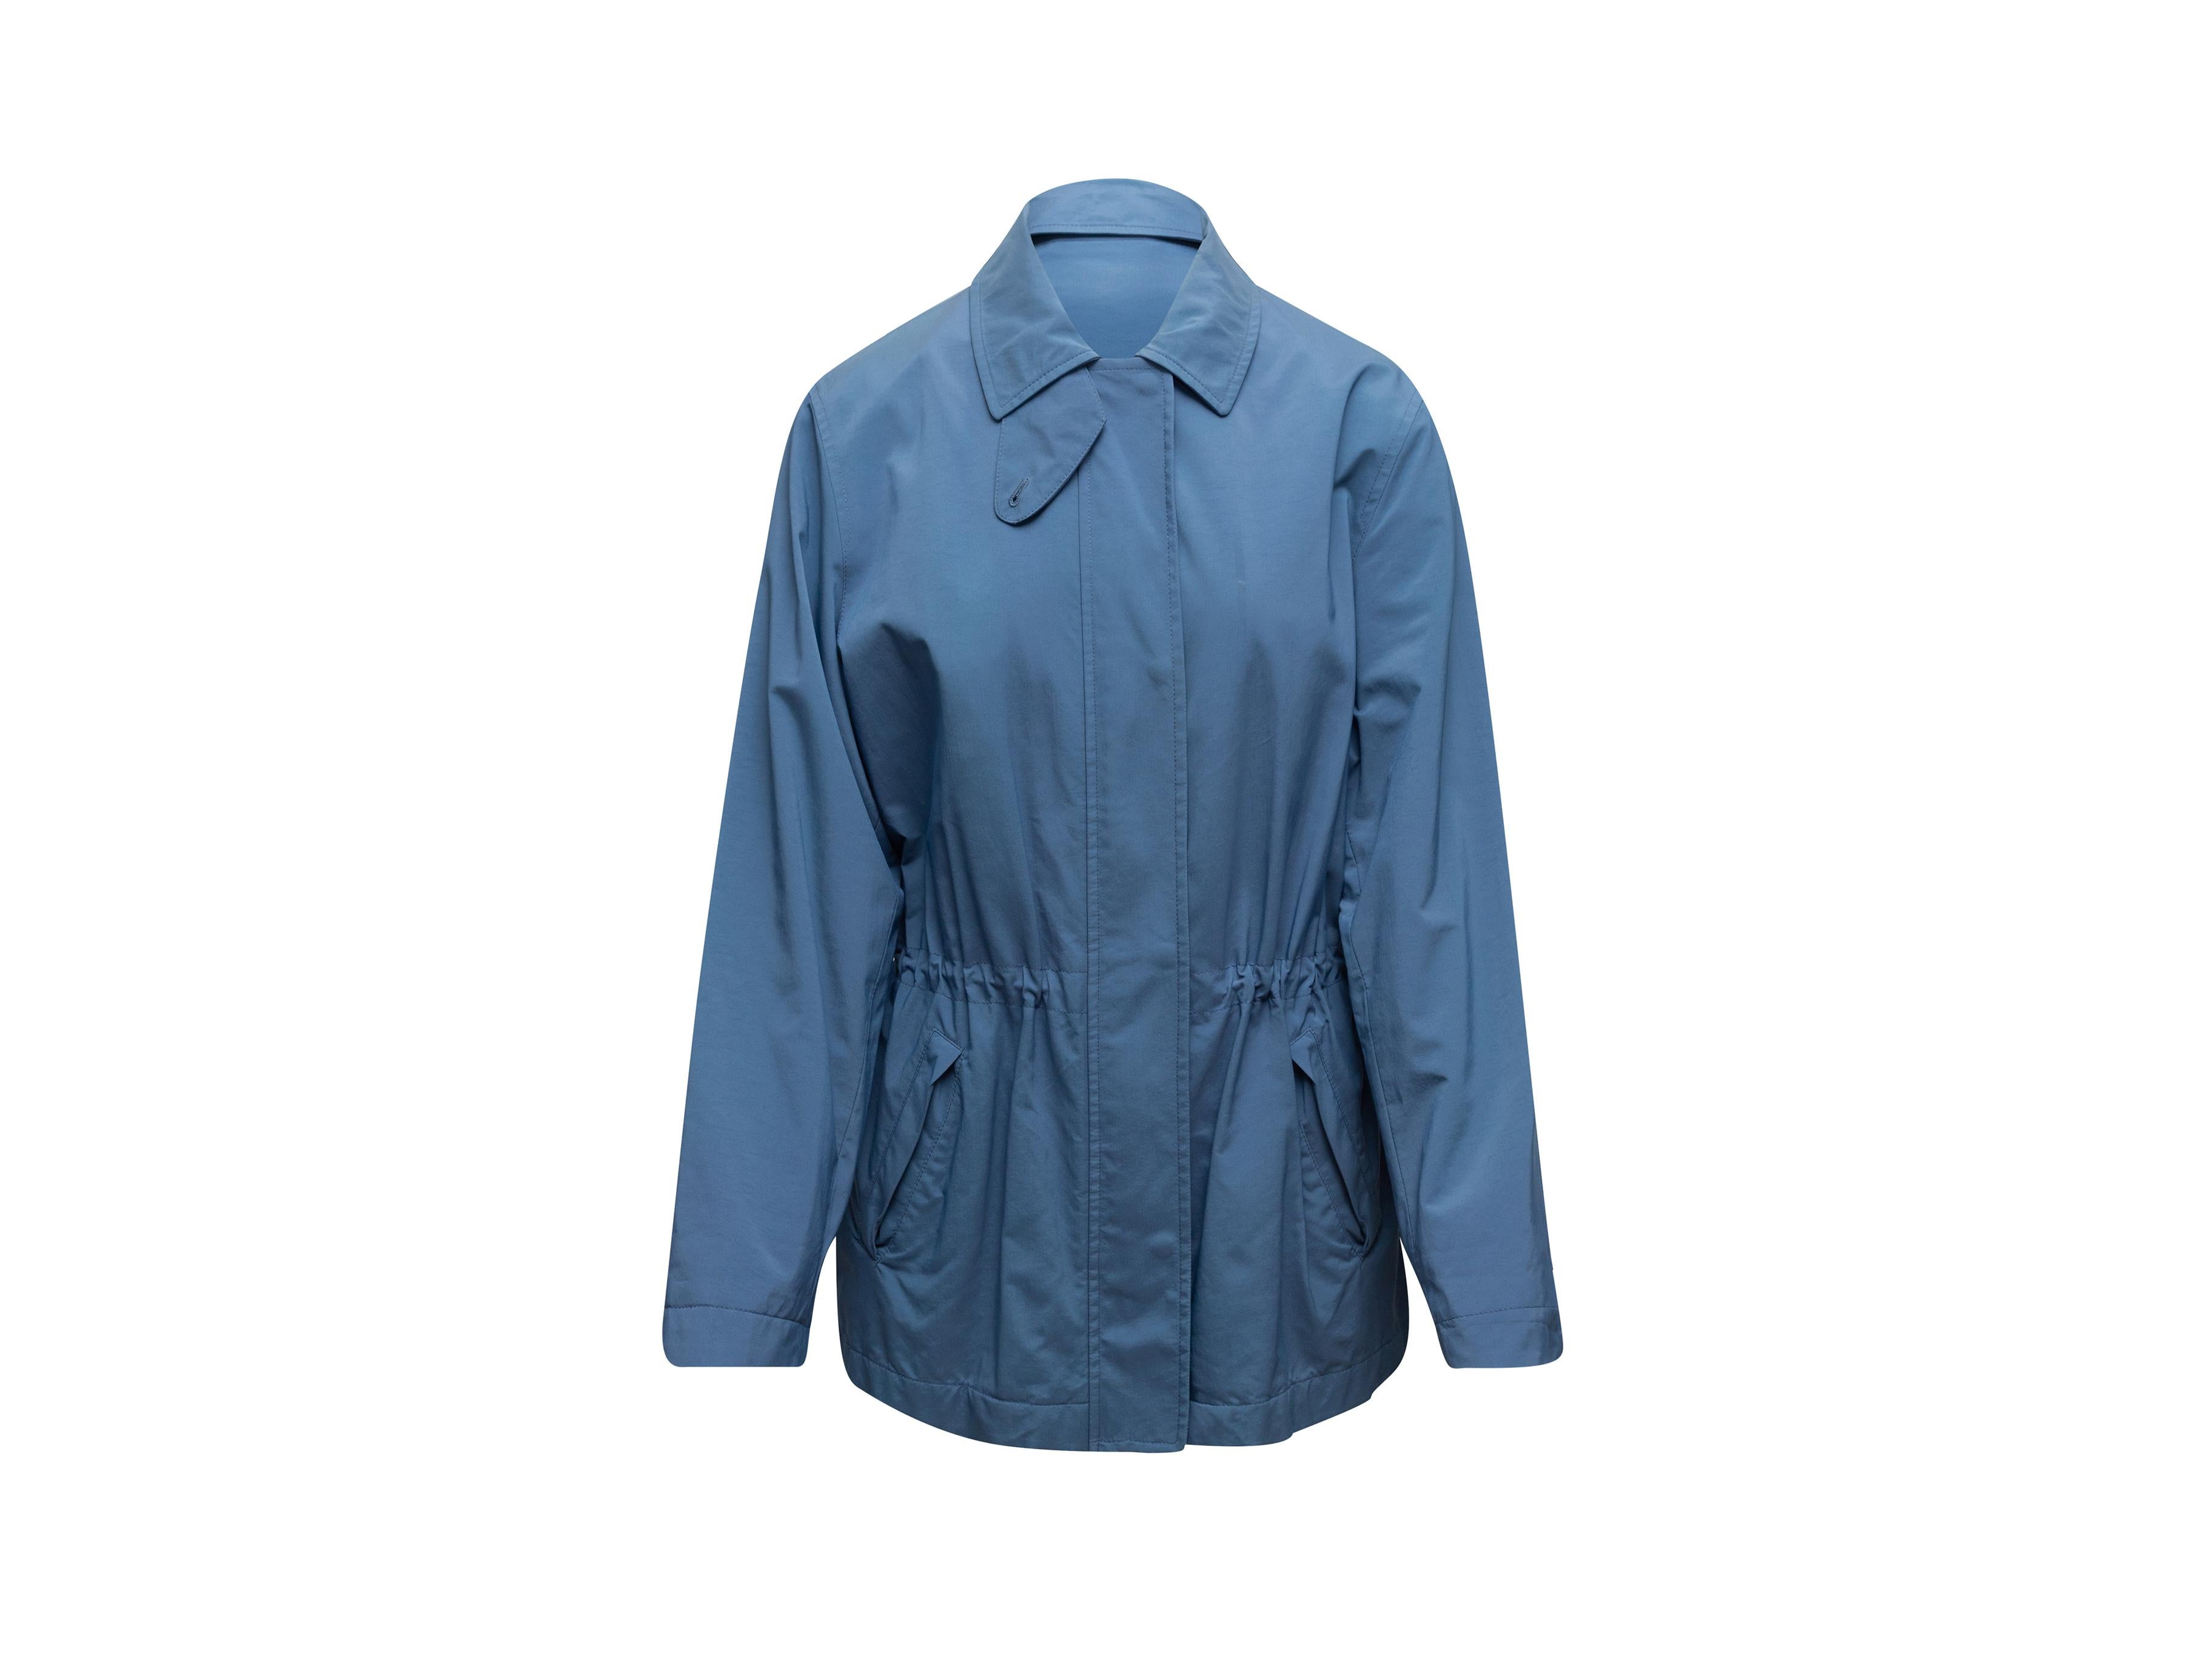 Product details: Blue cotton jacket by Loro Piana. Pointed collar. Cinched waist. Dual hip pockets. Concealed closures at front. Designer size 44. 42